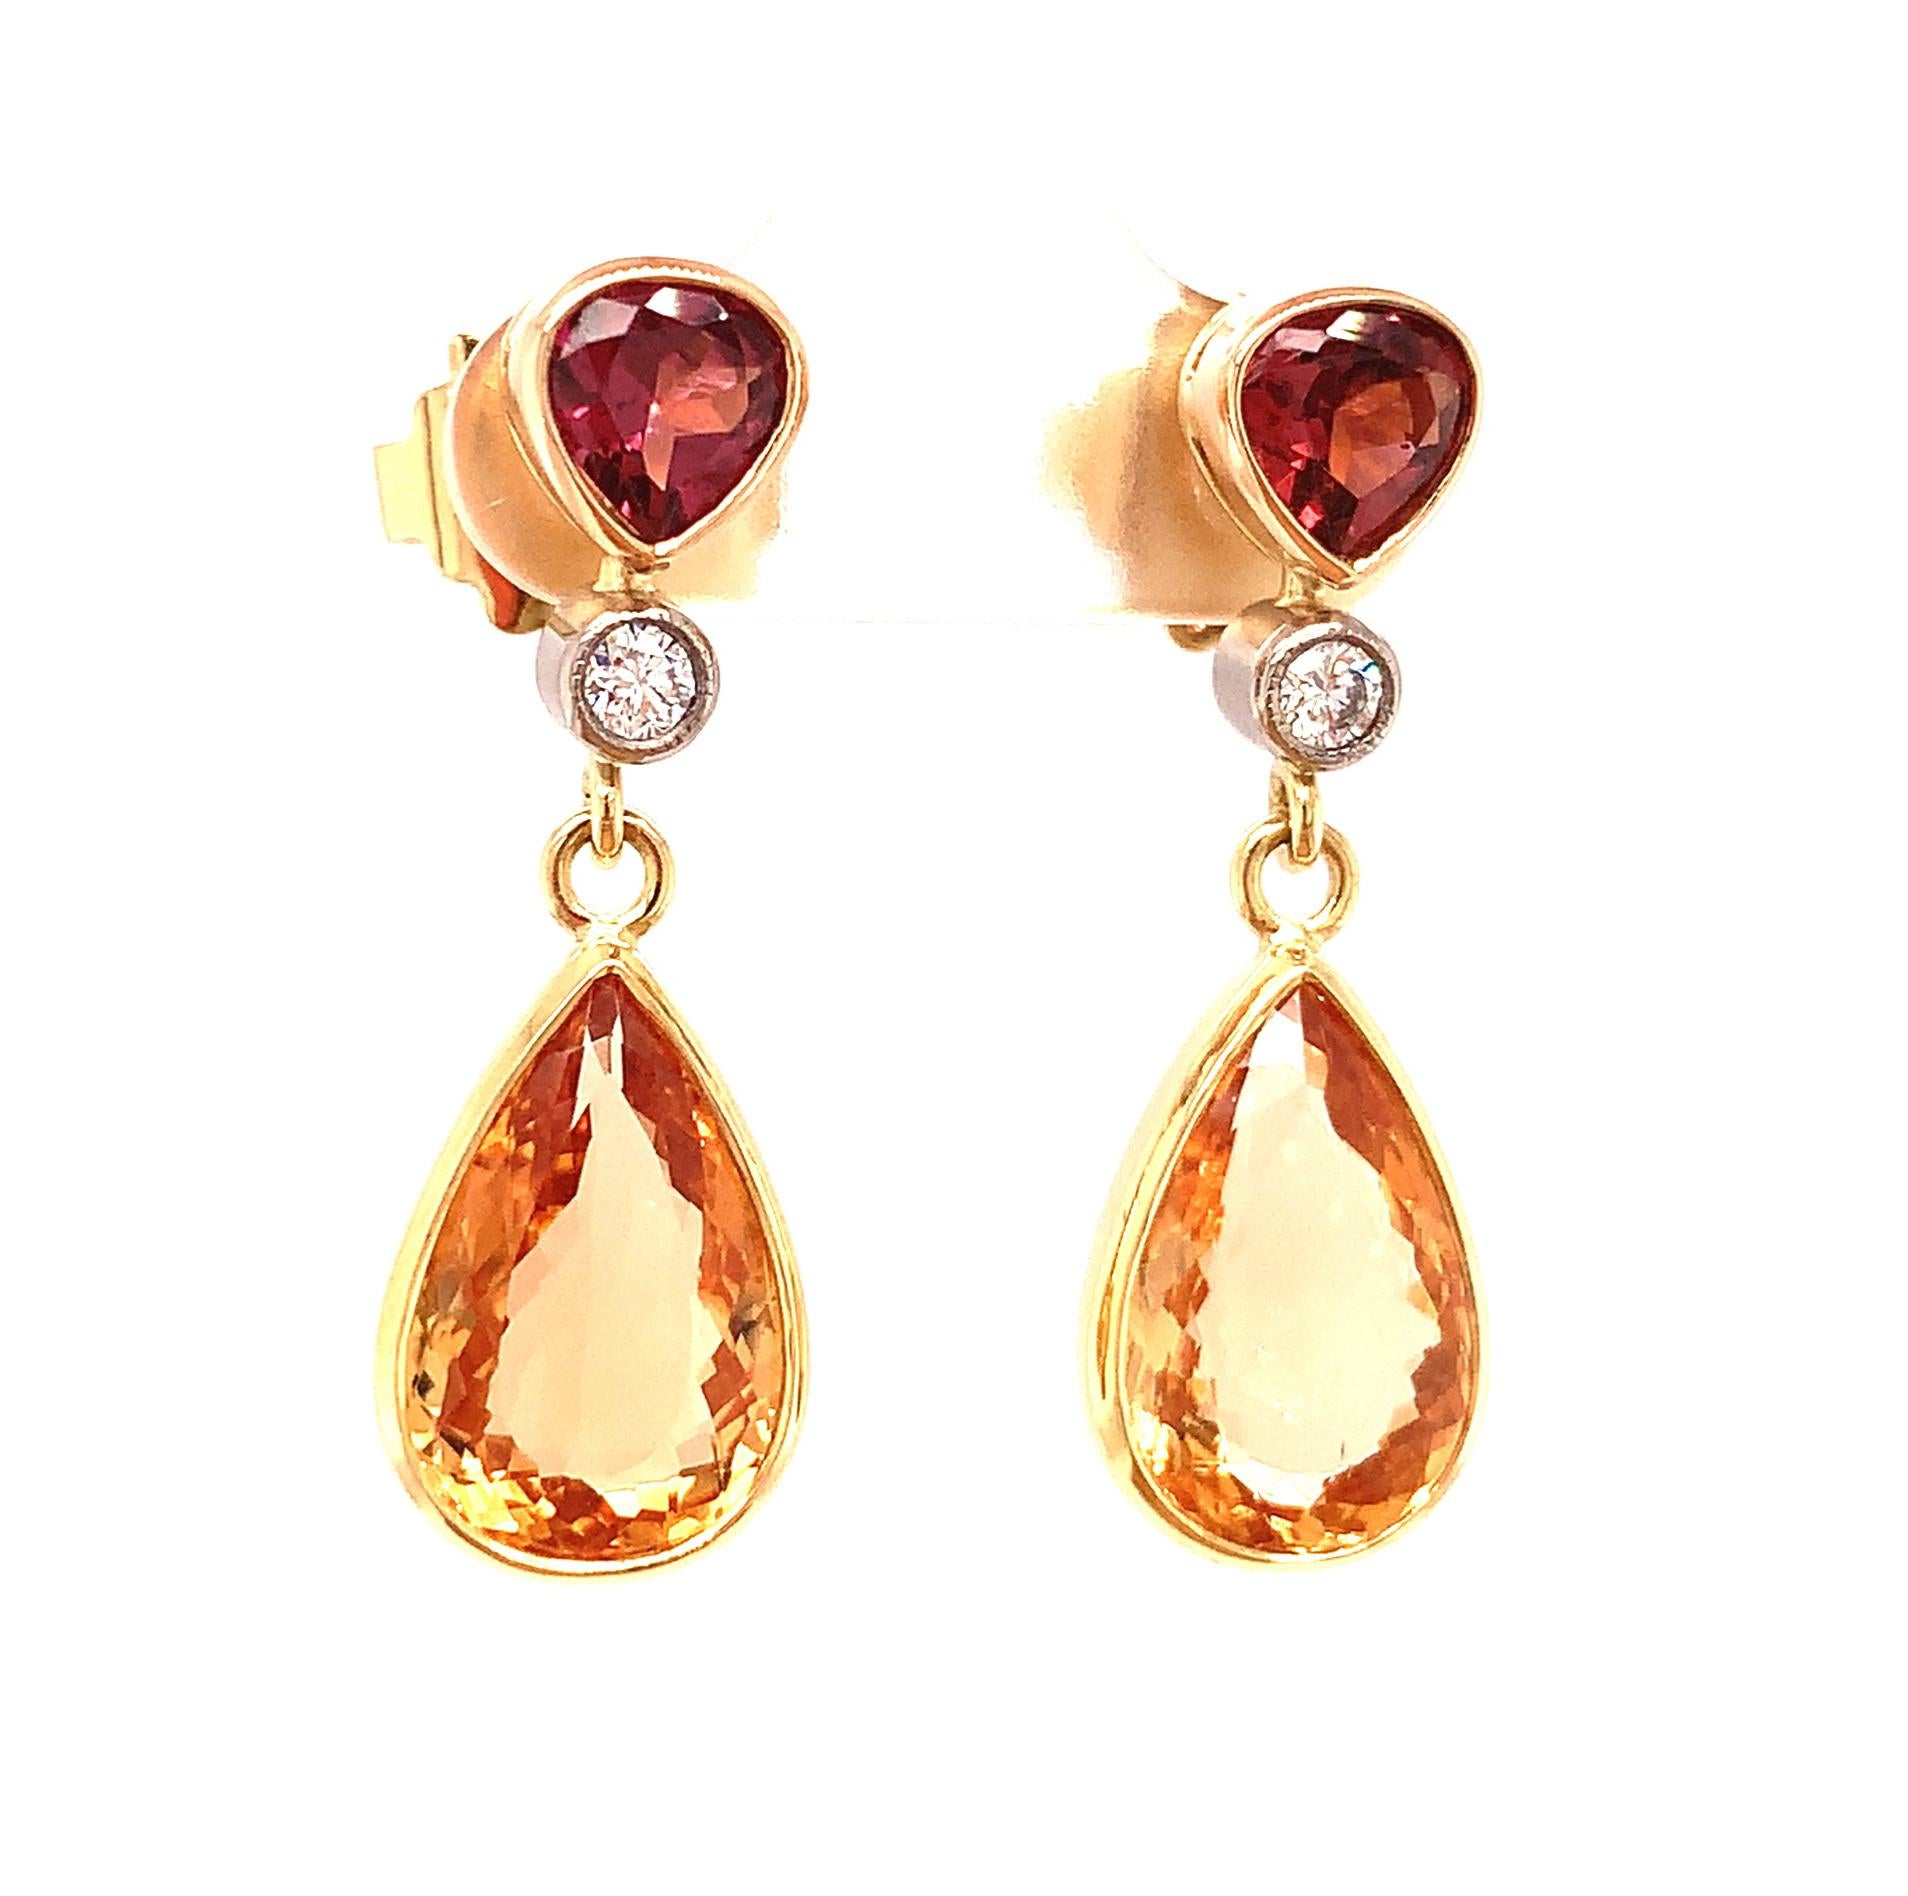 The beauty of these red and gold dangle earrings is undeniable! Fine quality precious topazes and mulberry colored garnets update this classic style with a unique pairing of shapes and colors. Matched pairs of precious topaz are seldom seen in this